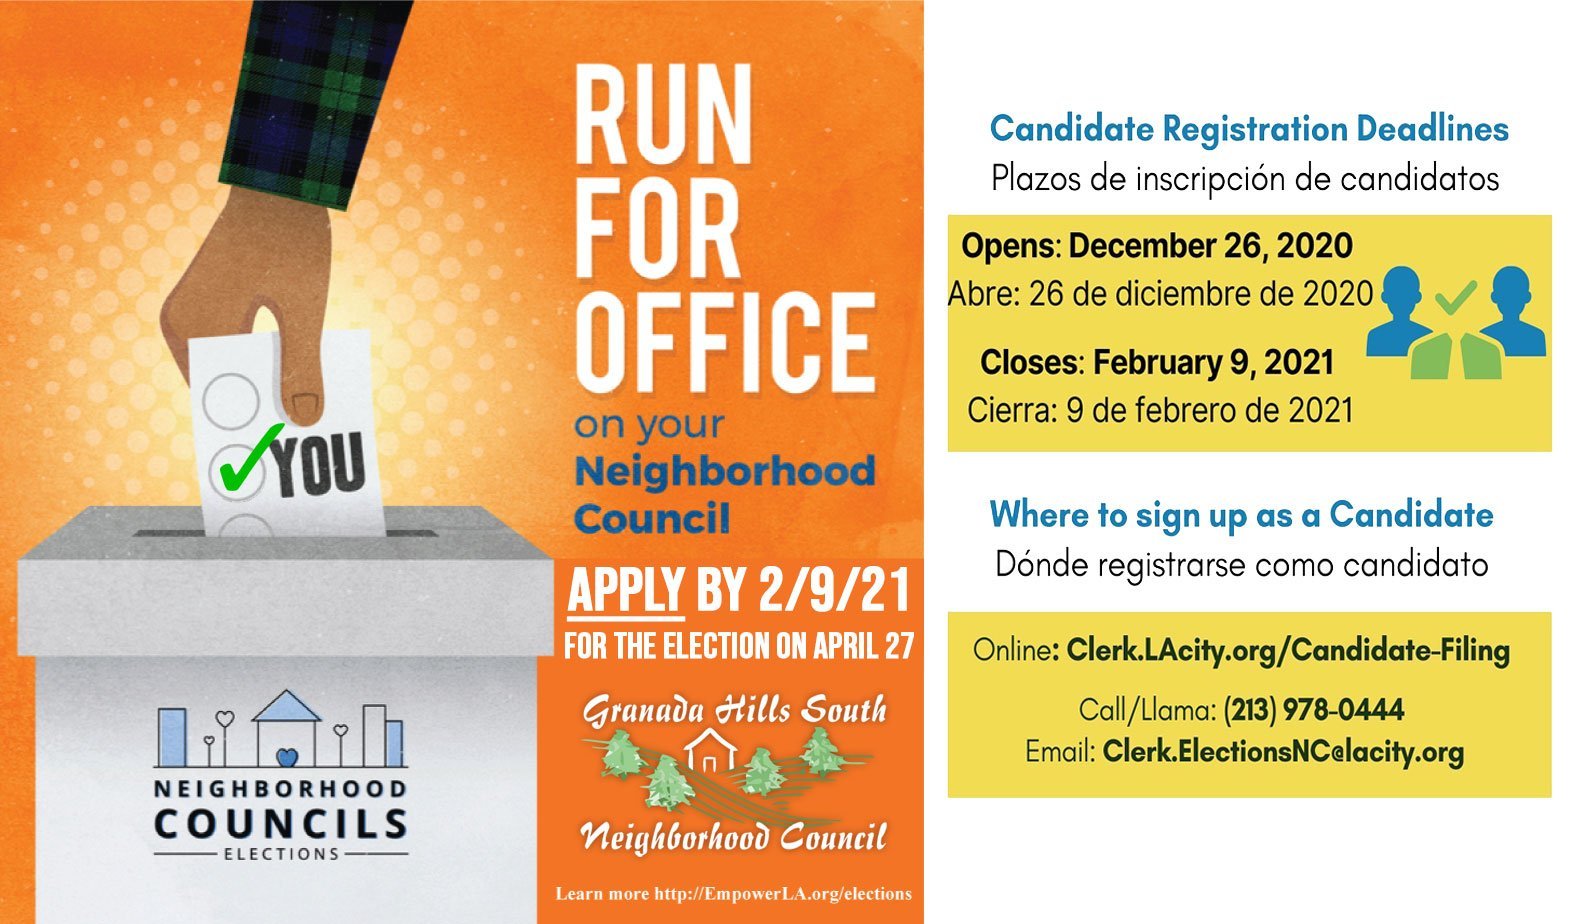 Now is your chance to make a difference in Granada Hills South!